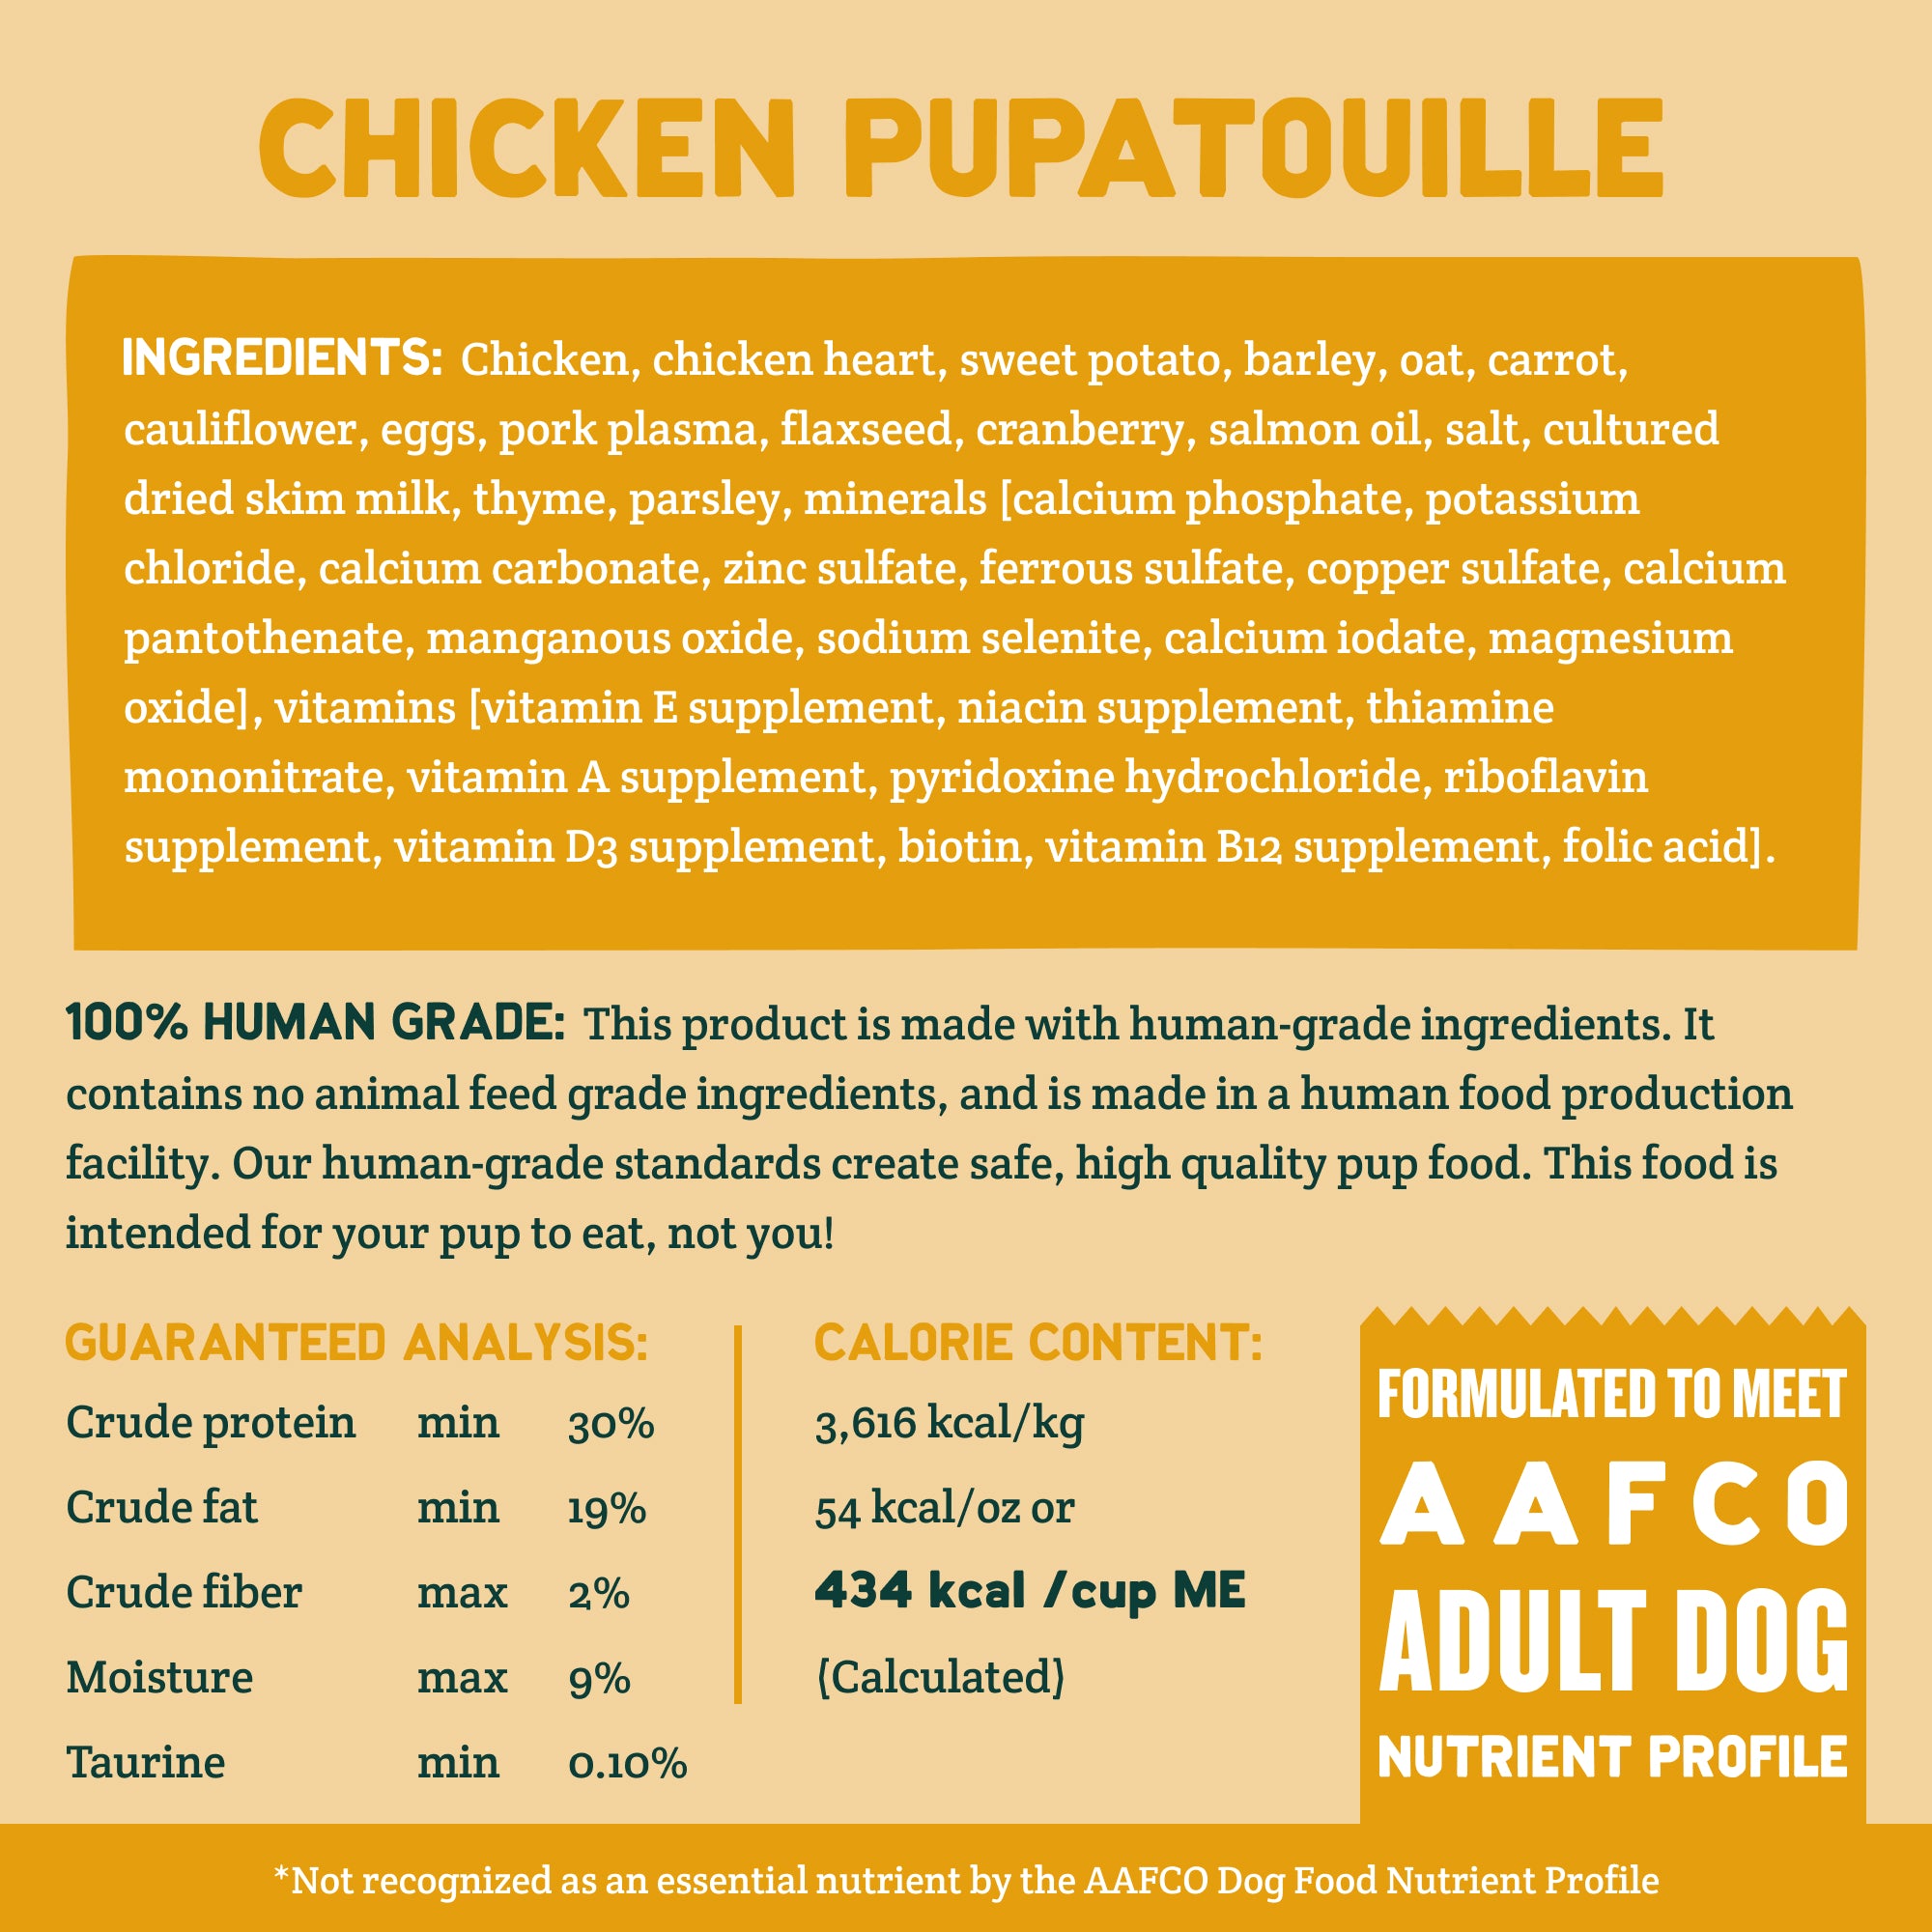 Chicka Pupatouille Nutrition Facts